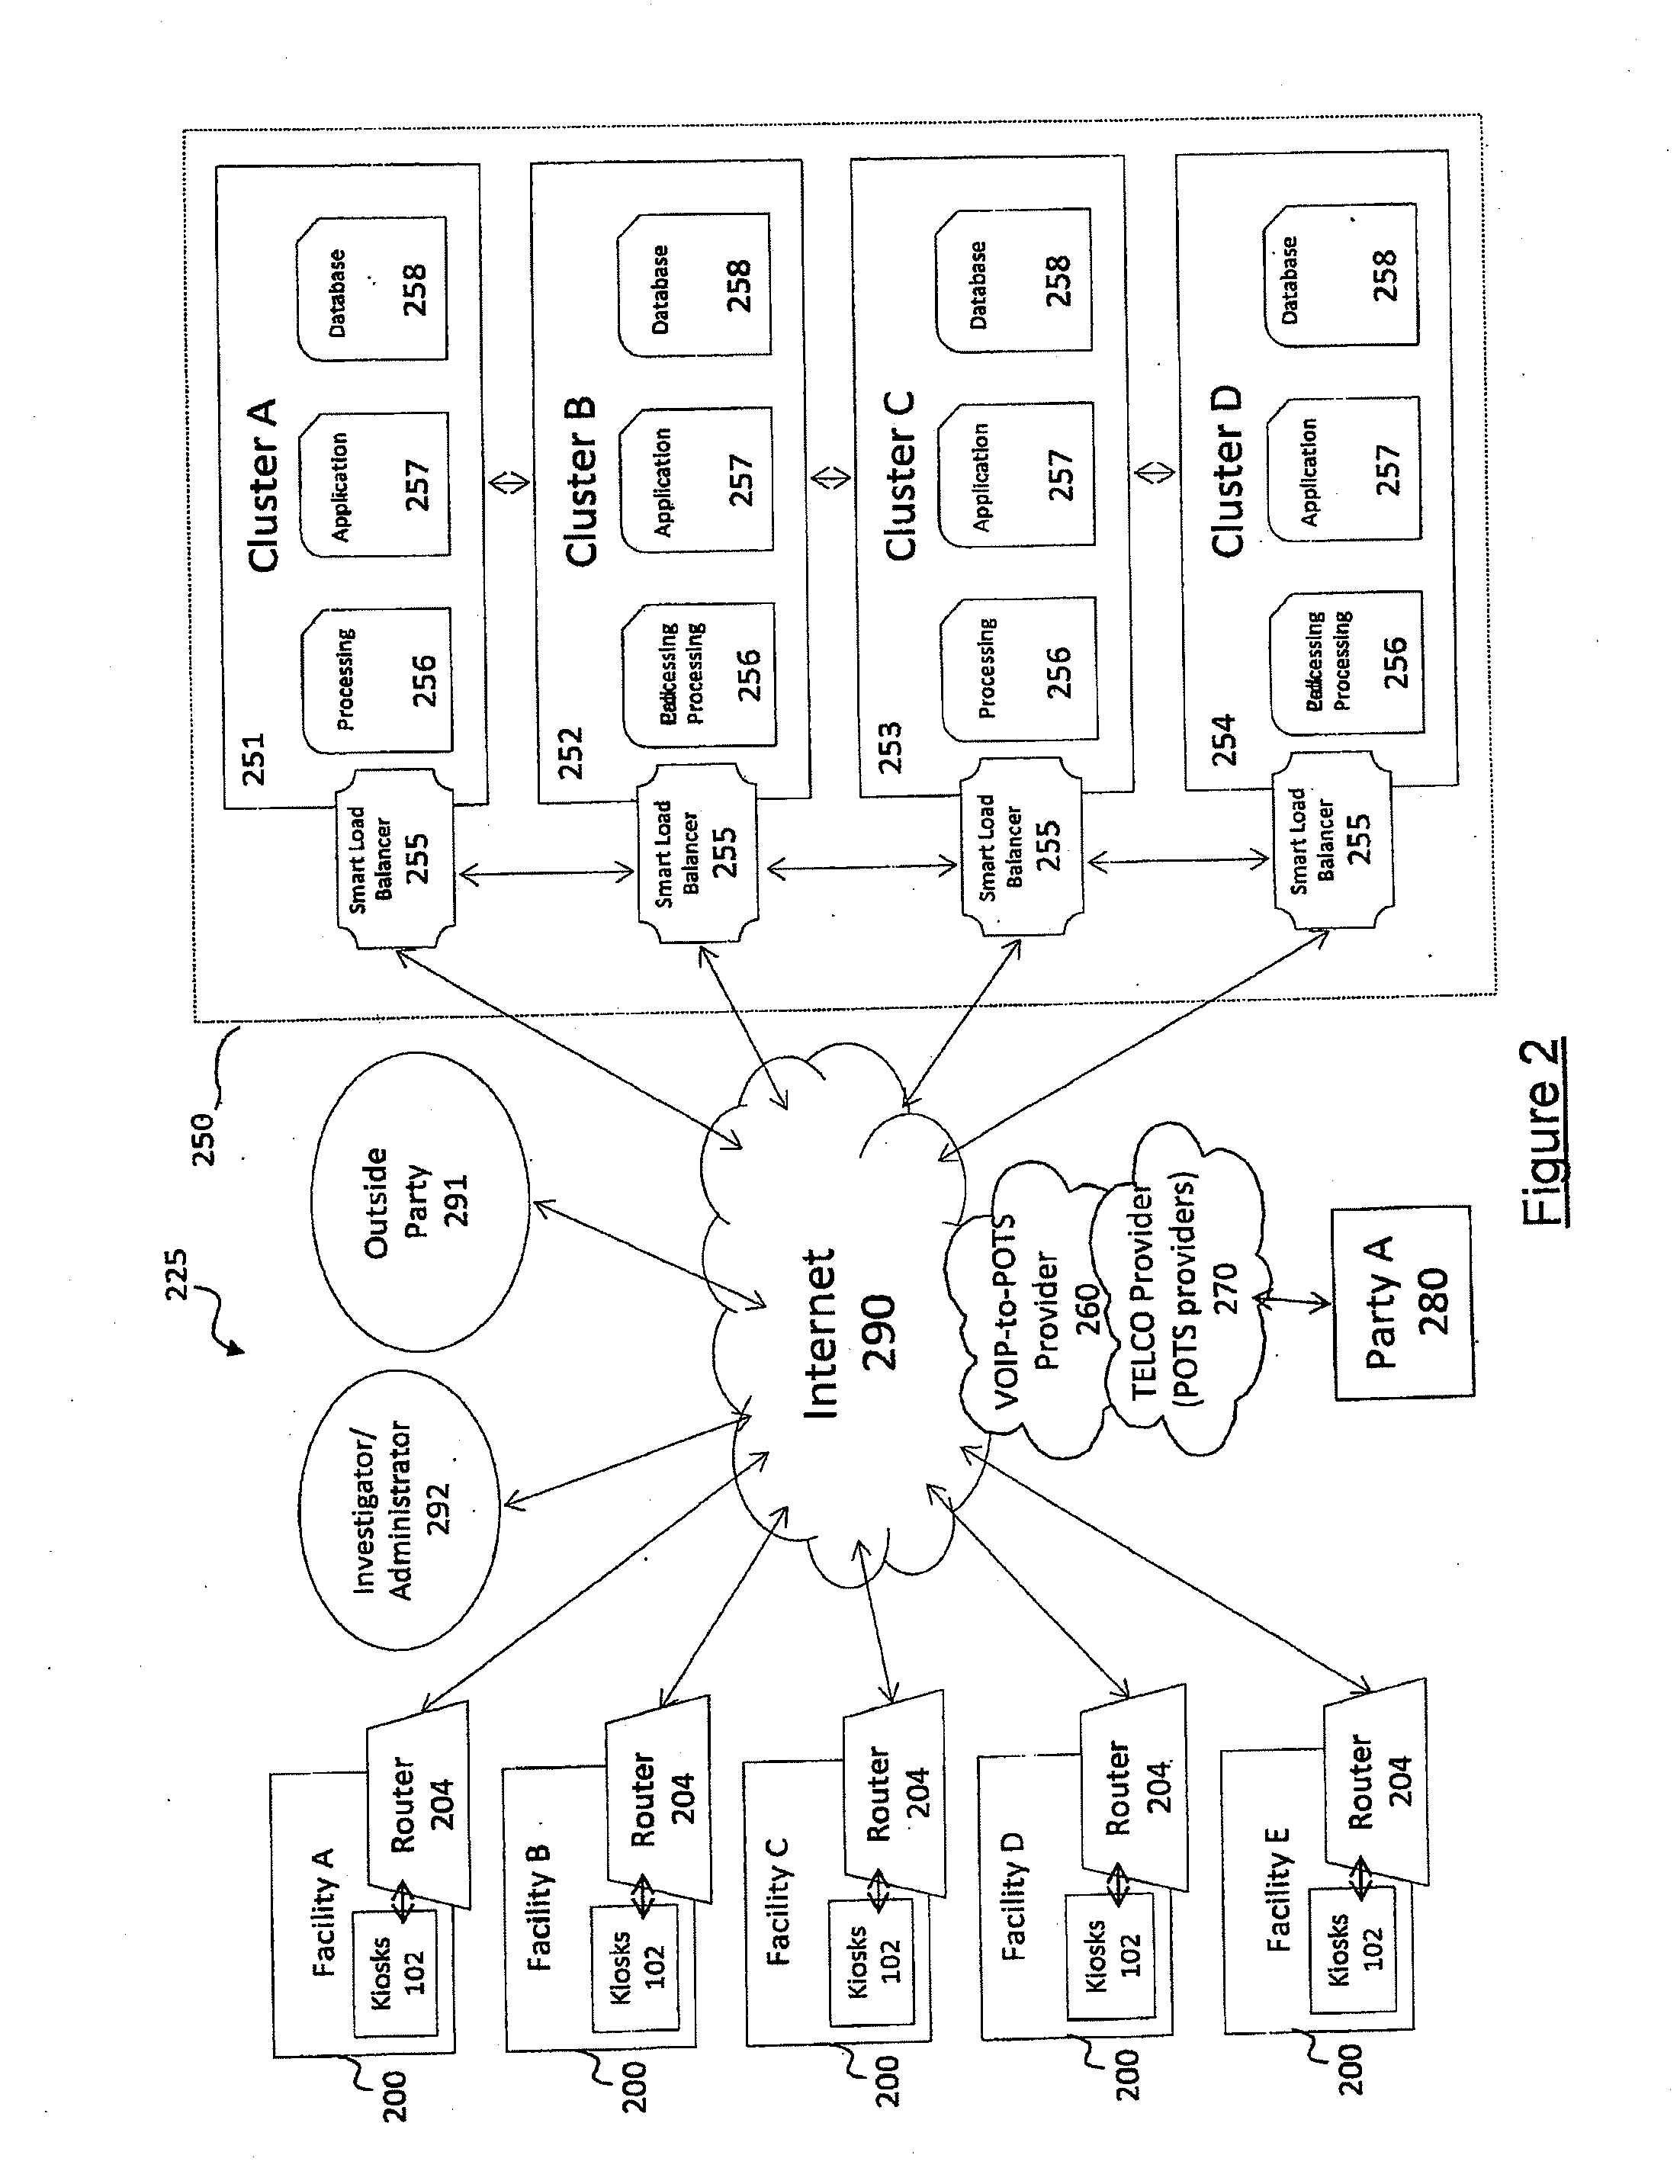 Interactive audio/video system and device for use in a secure facility